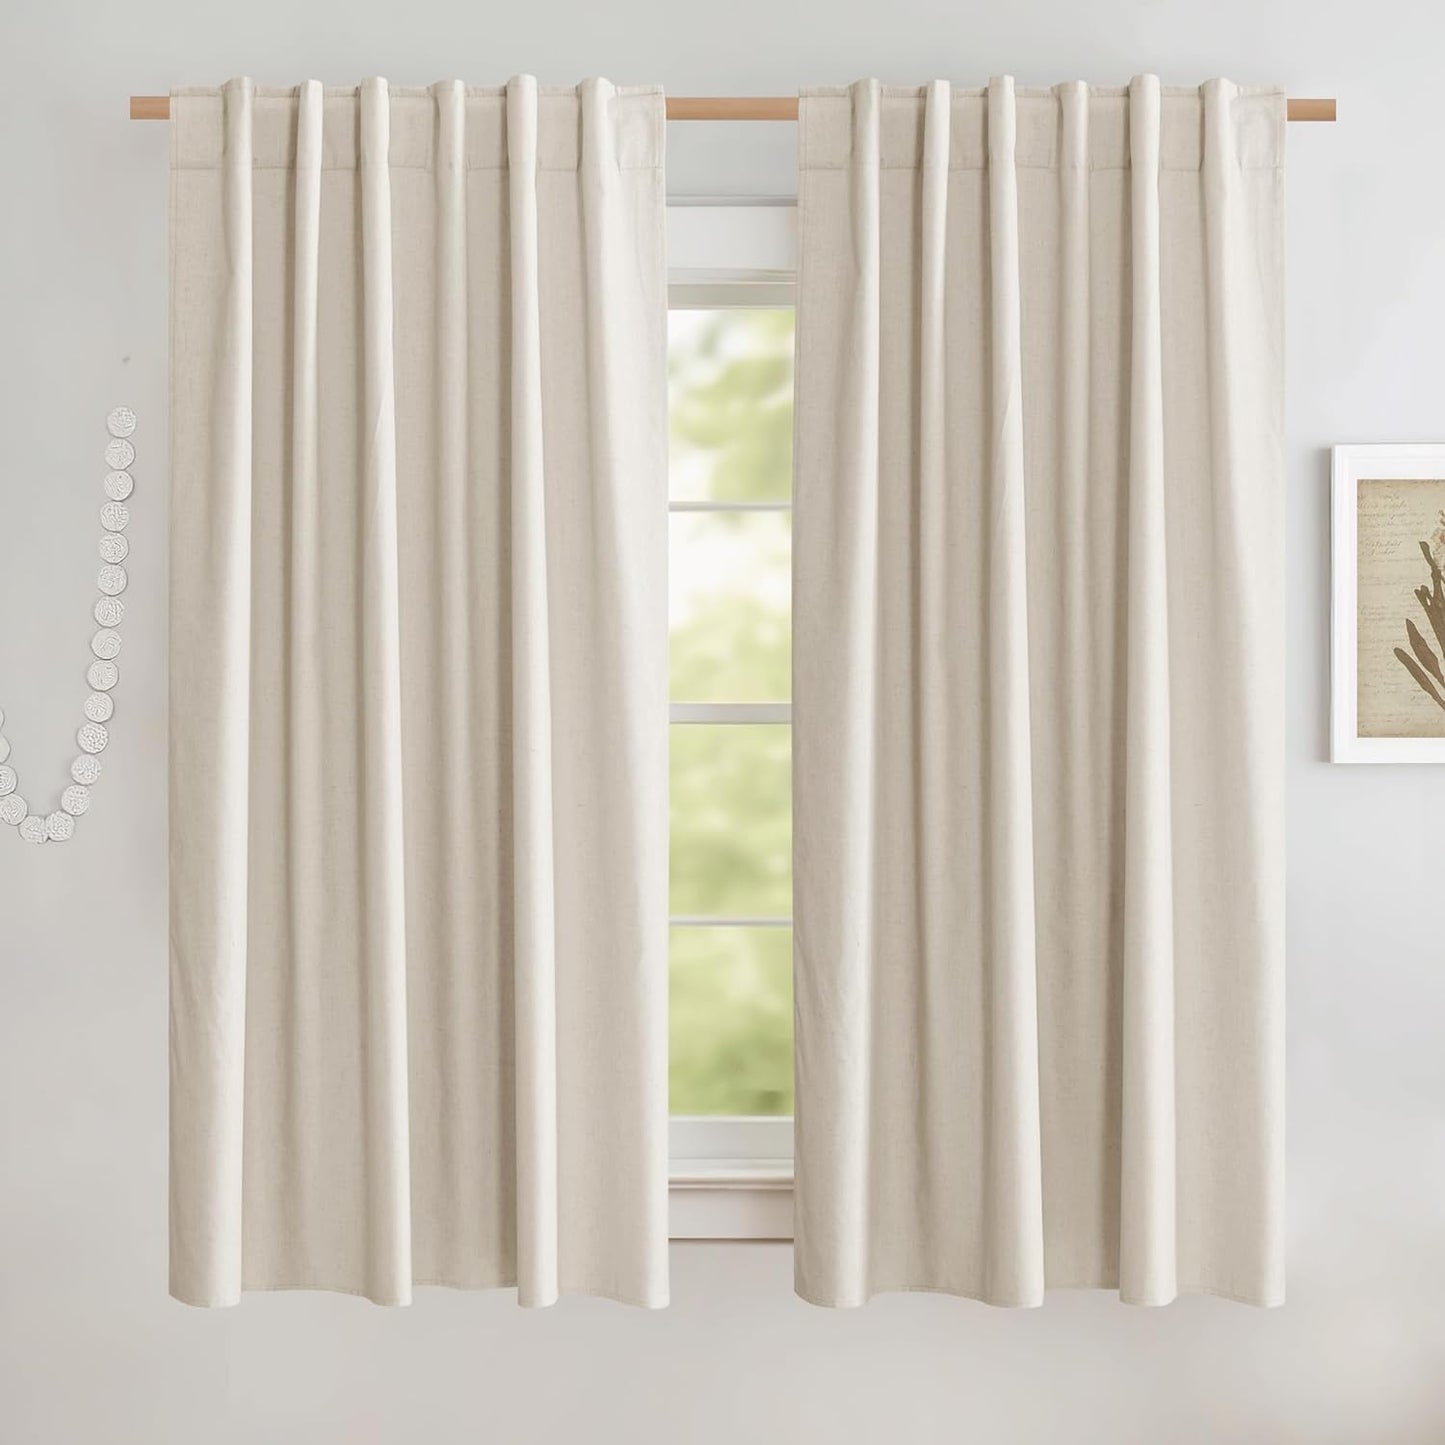 NICETOWN 100% Blackout Linen Curtains for Living Room with Thermal Insulated White Liner, Ivory, 52" Wide, 2 Panels, 84" Long Drapes, Back Tab Retro Linen Curtains Vertical Drapes Privacy for Bedroom  NICETOWN Beige W52 X L63 